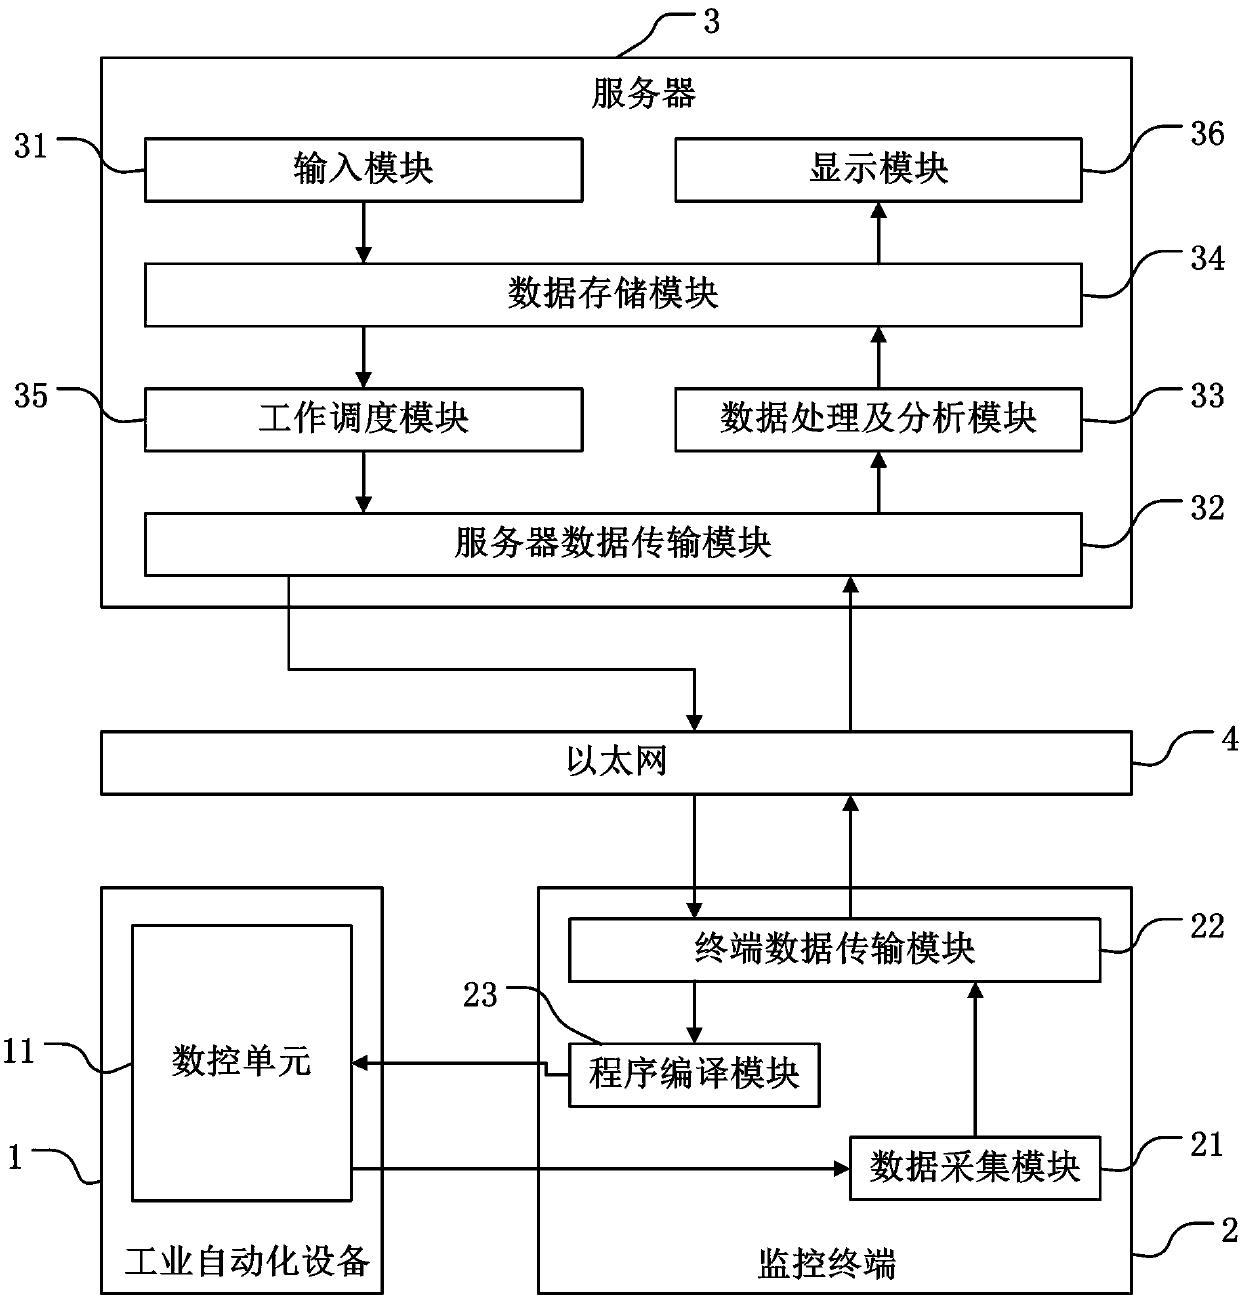 Job Scheduling Method for Automated Industrial Equipment